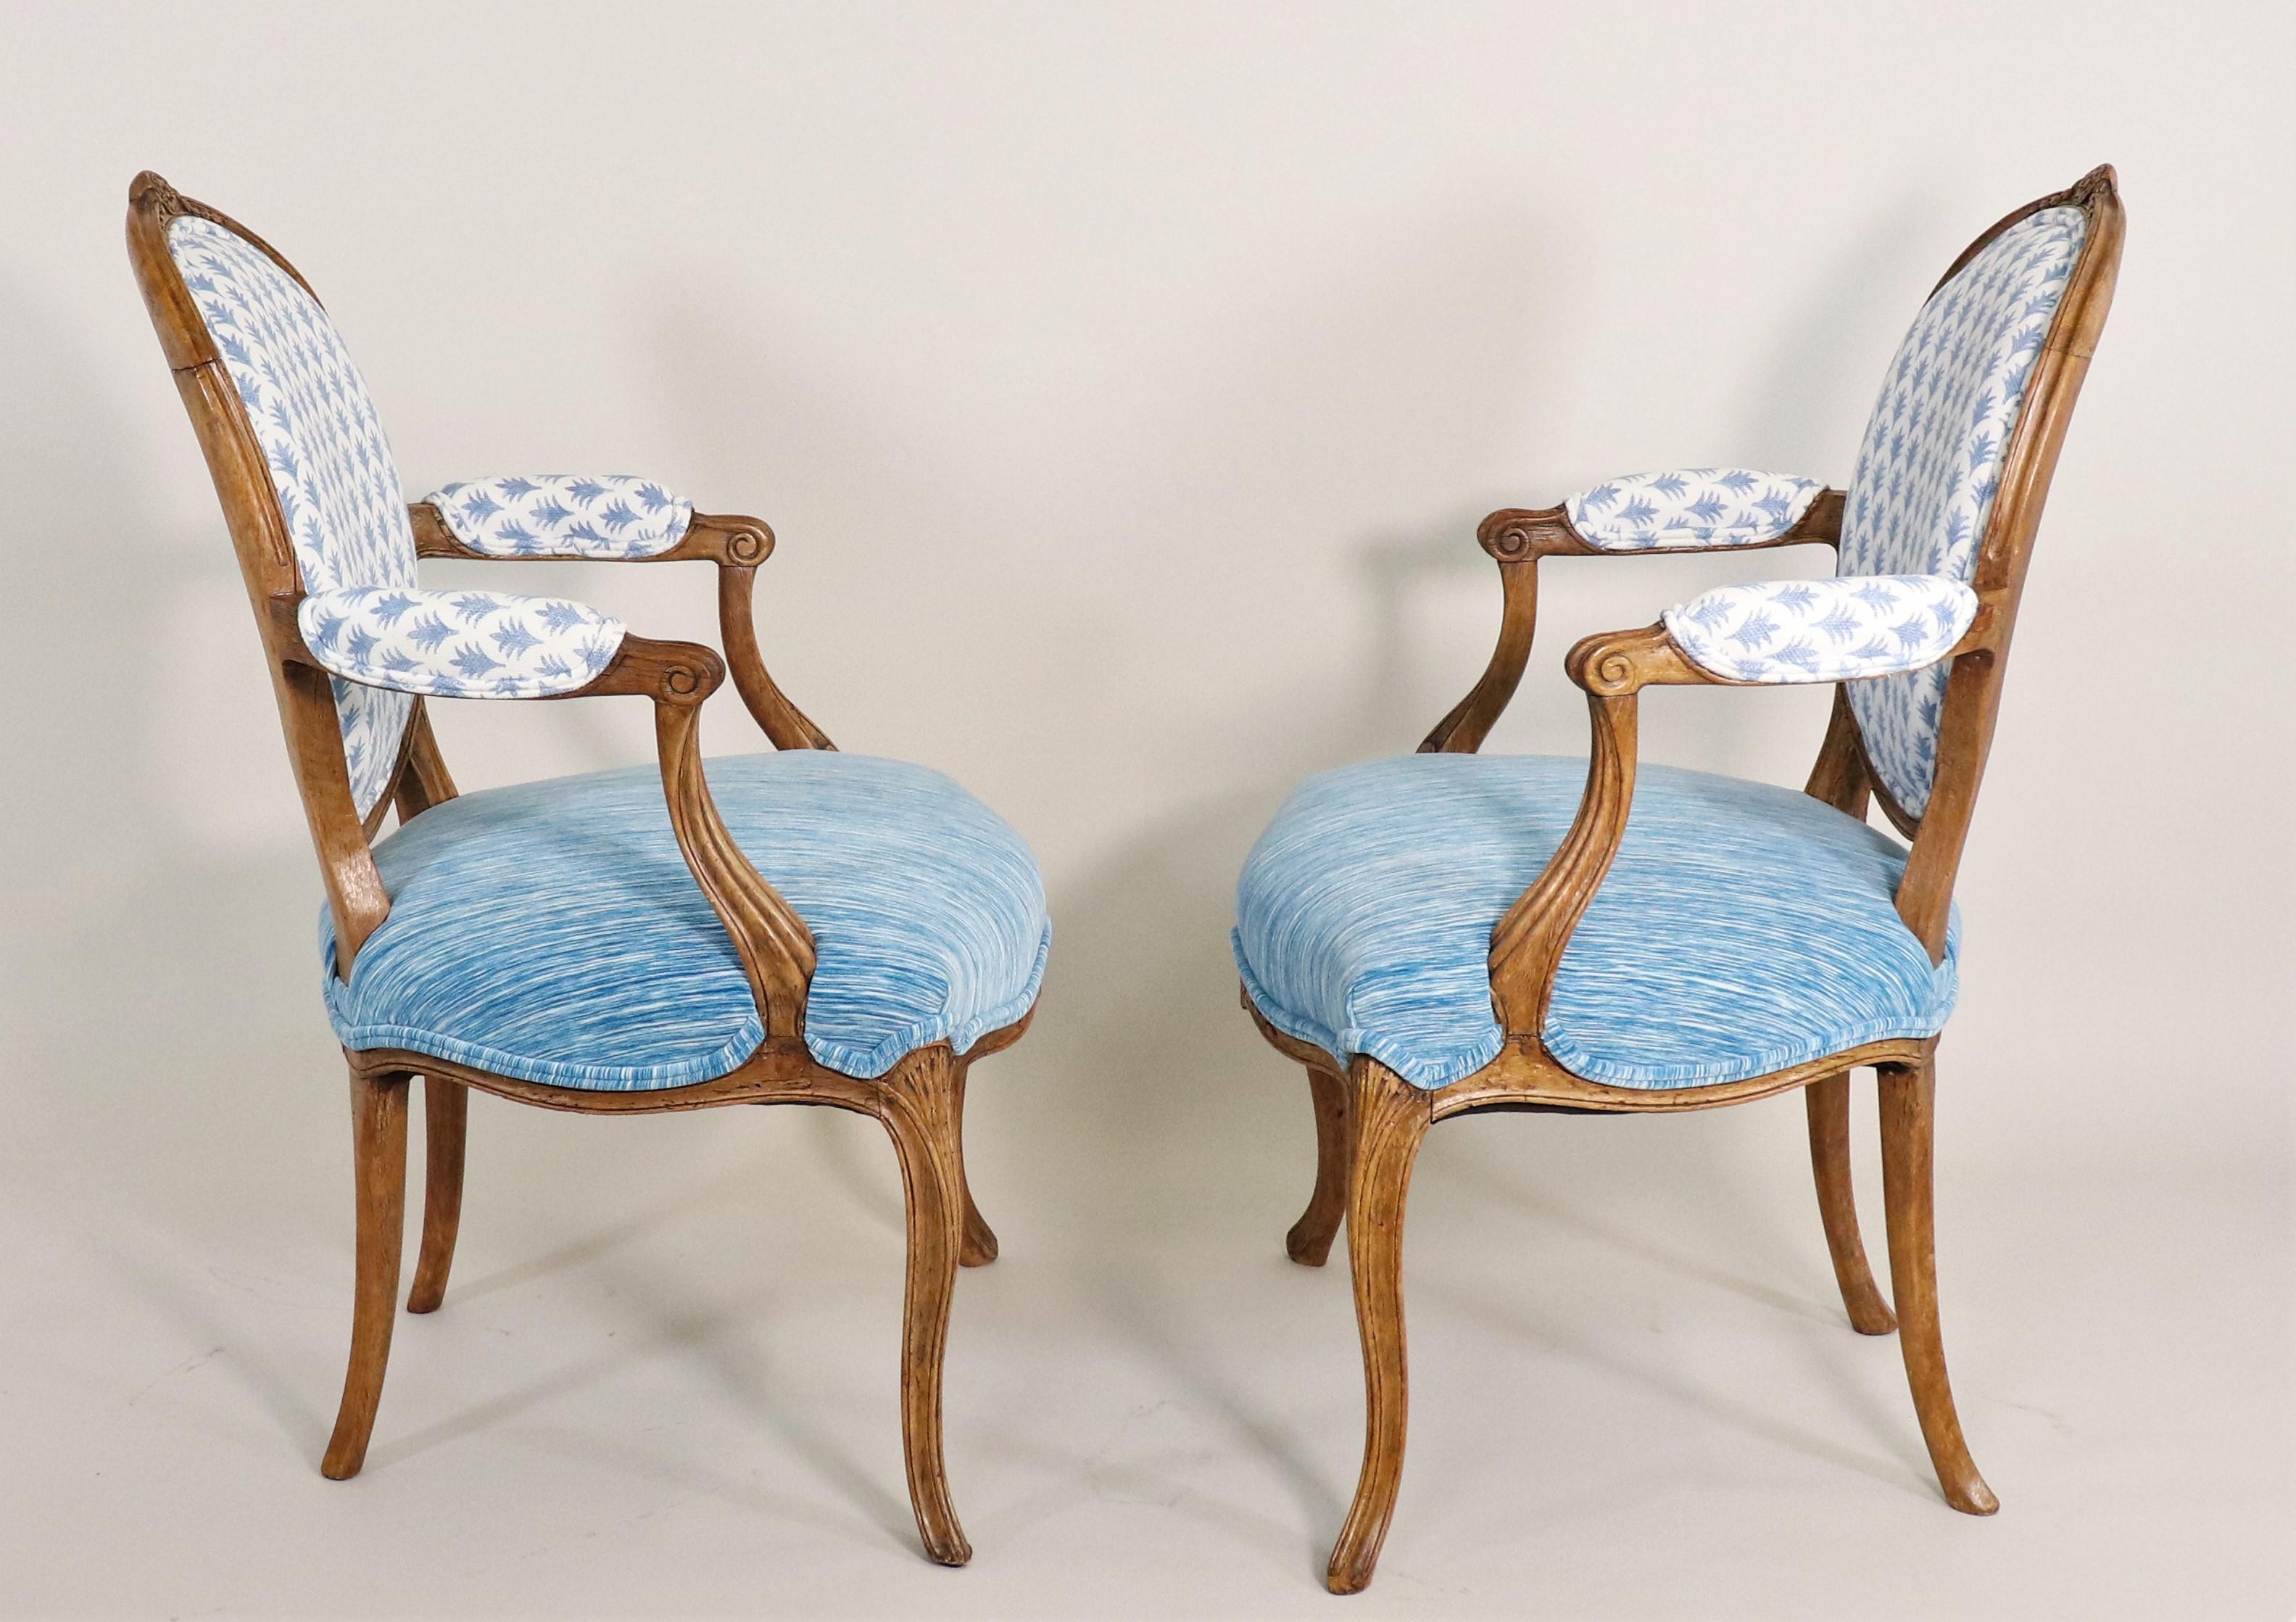 Carved Pair of Mid-19th Century French Régence Style Fauteuils with Modern Fabrics For Sale